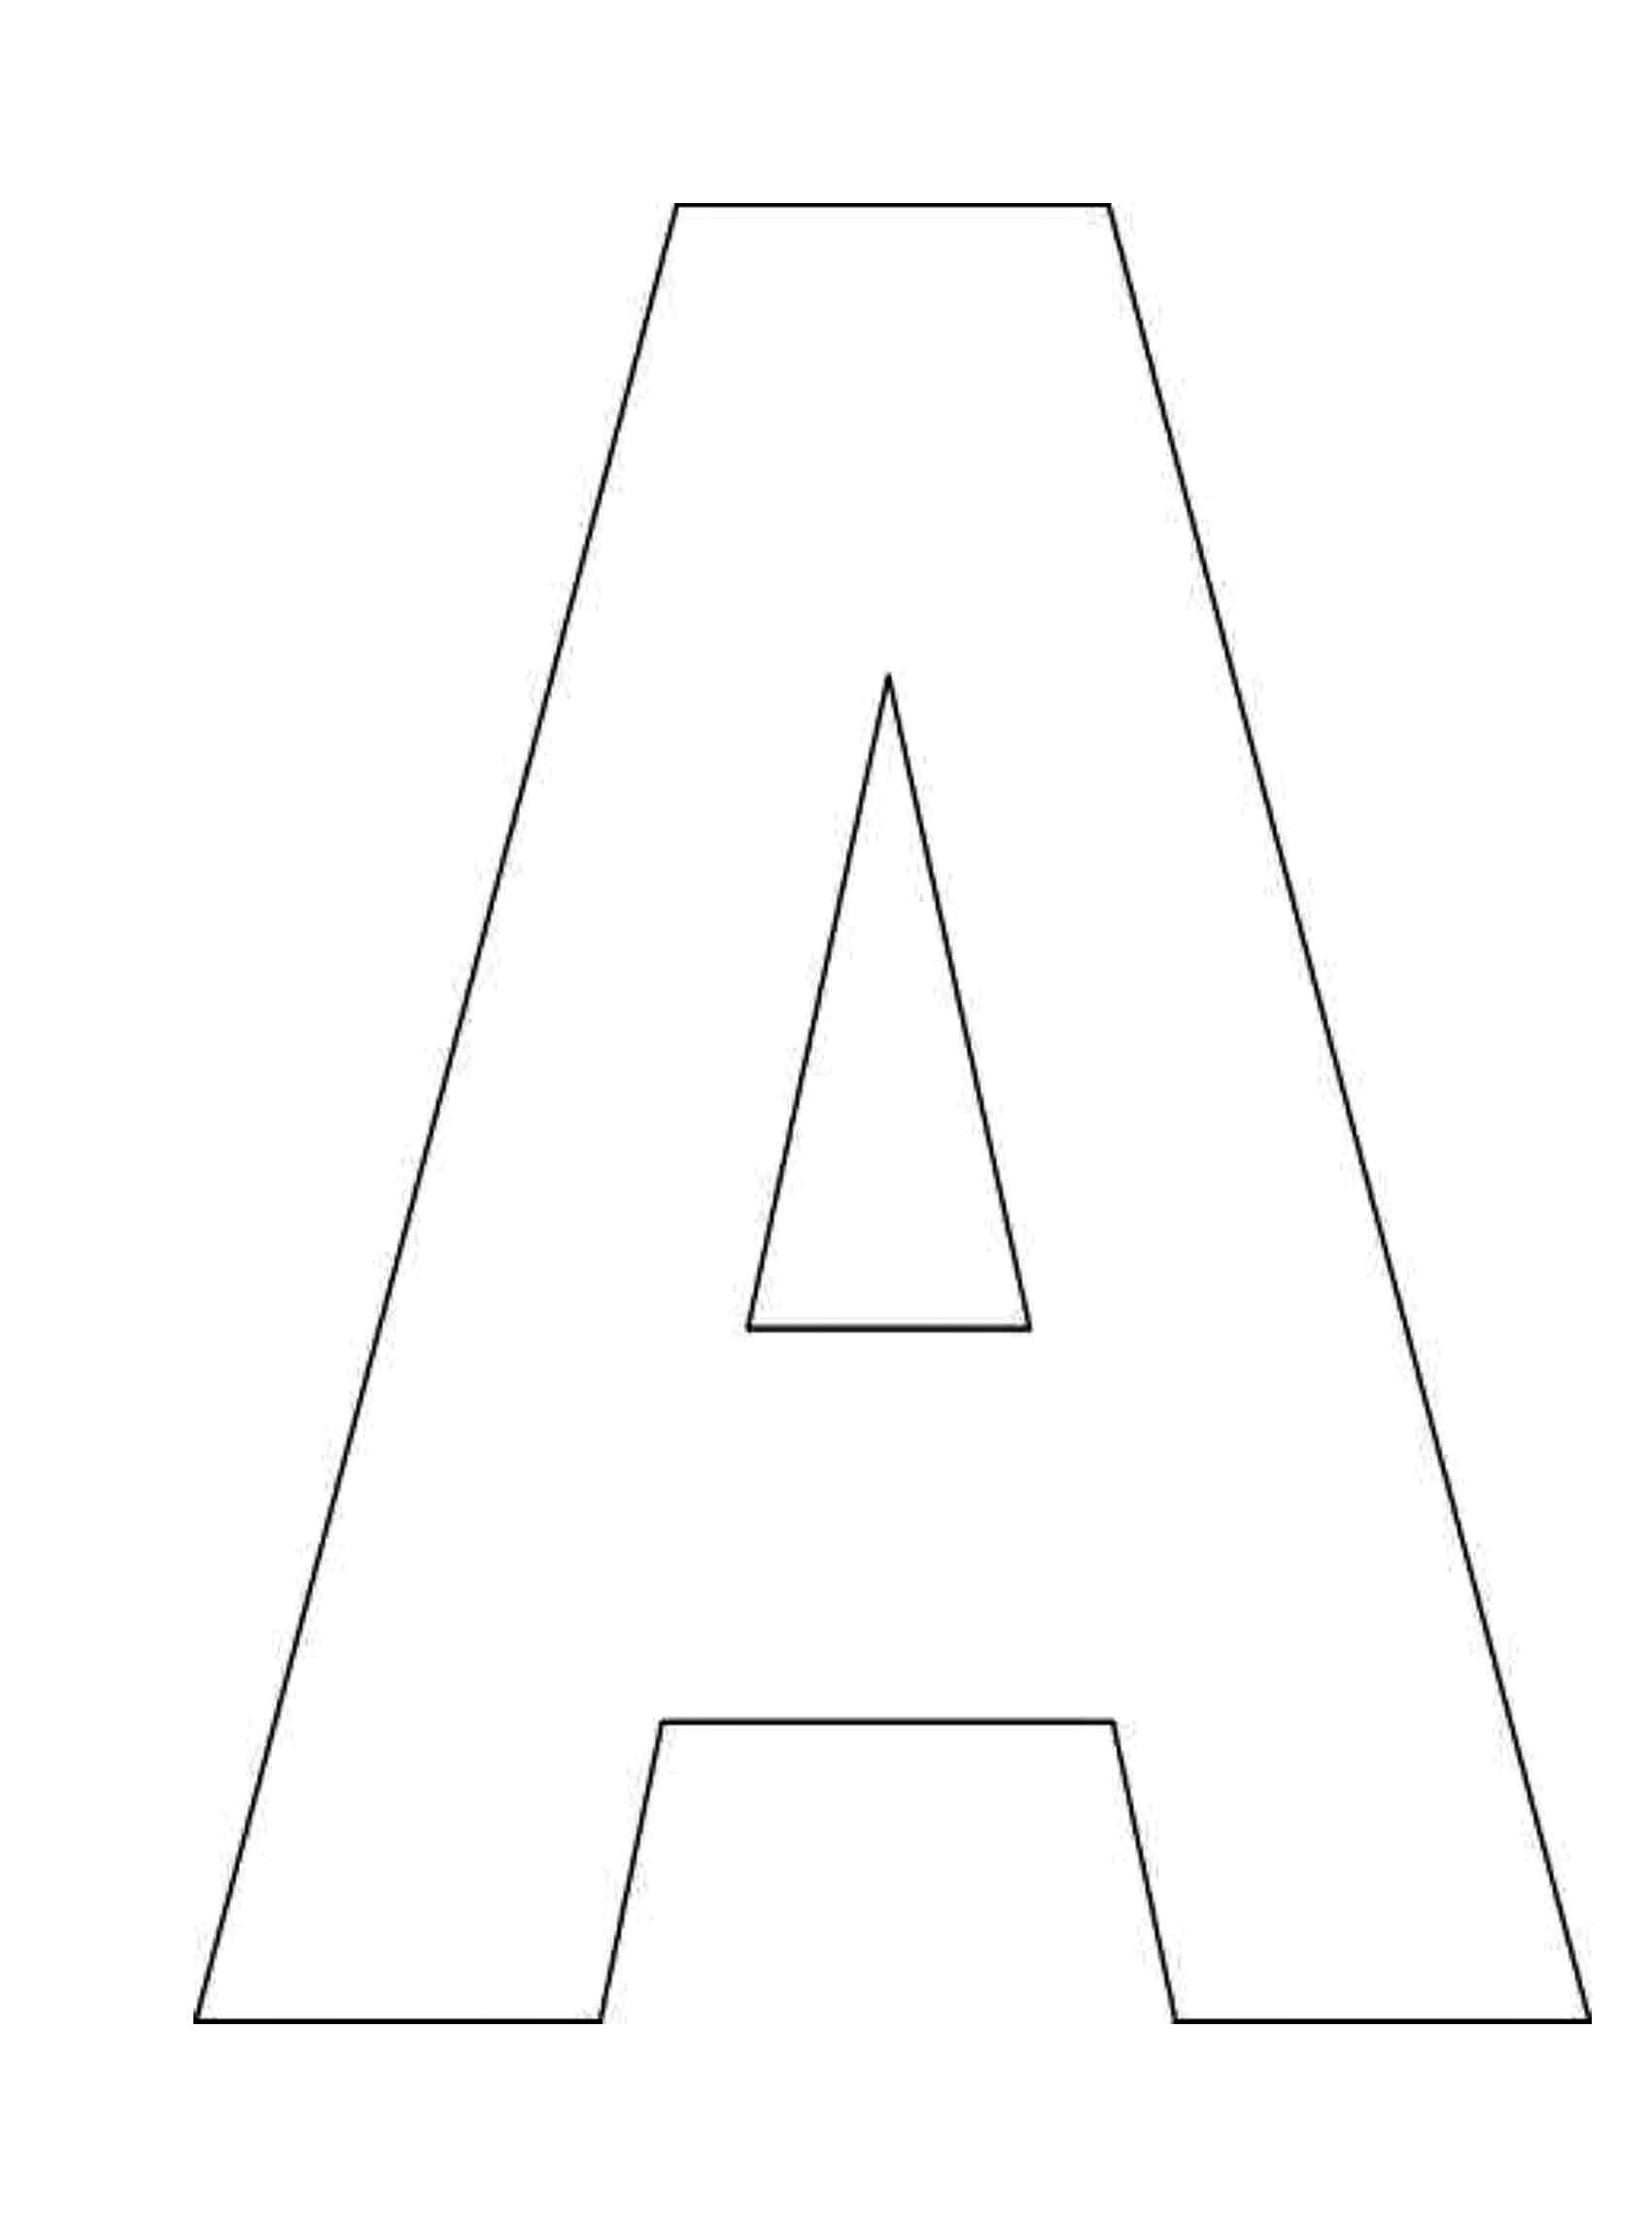 a-to-z-free-printable-alphabet-letters-banner